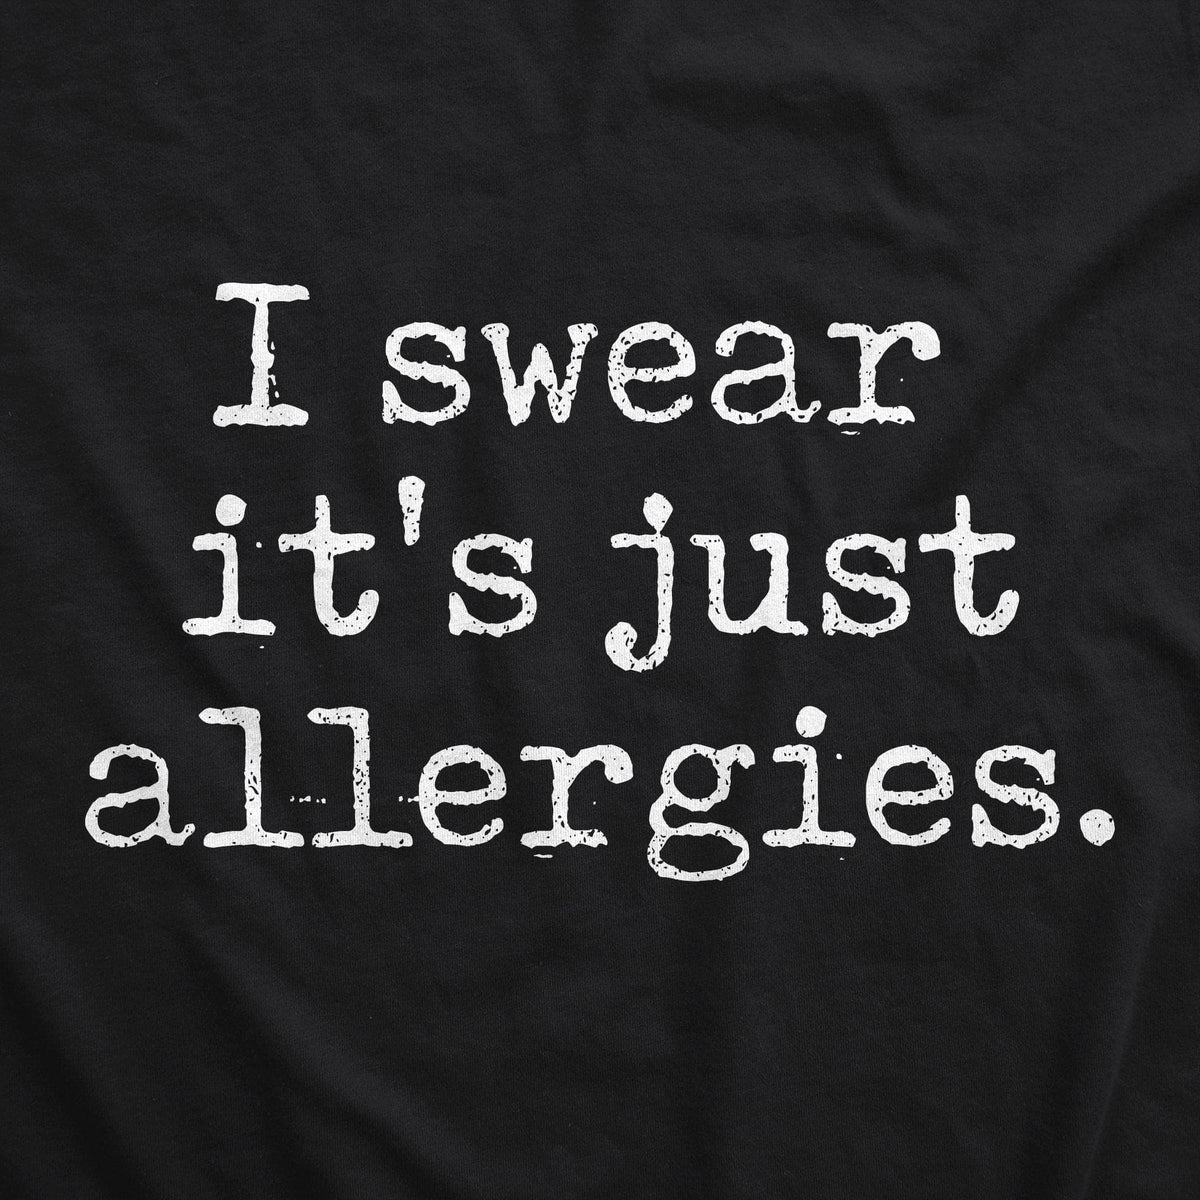 I Swear It&#39;s Just Allergies Face Mask Mask - Crazy Dog T-Shirts